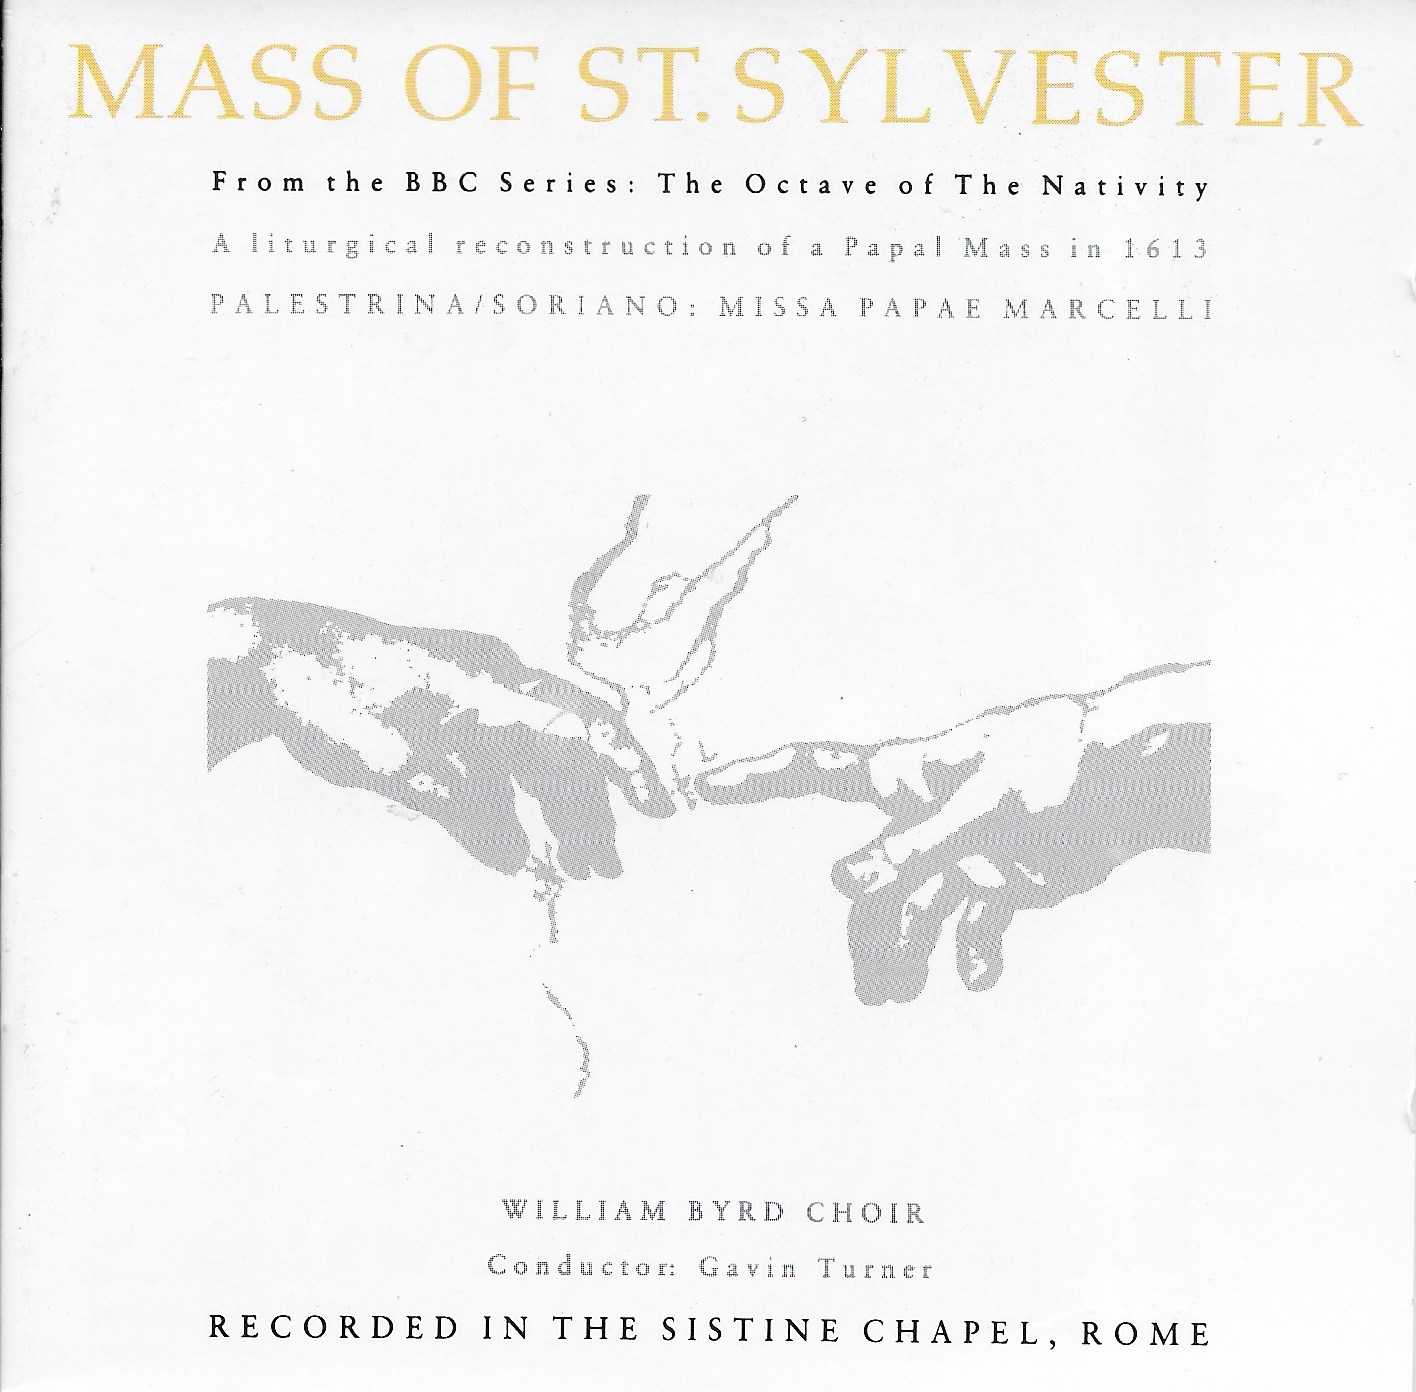 Picture of BBCCD572 Mass of St. Sylvester by artist Various from the BBC cds - Records and Tapes library